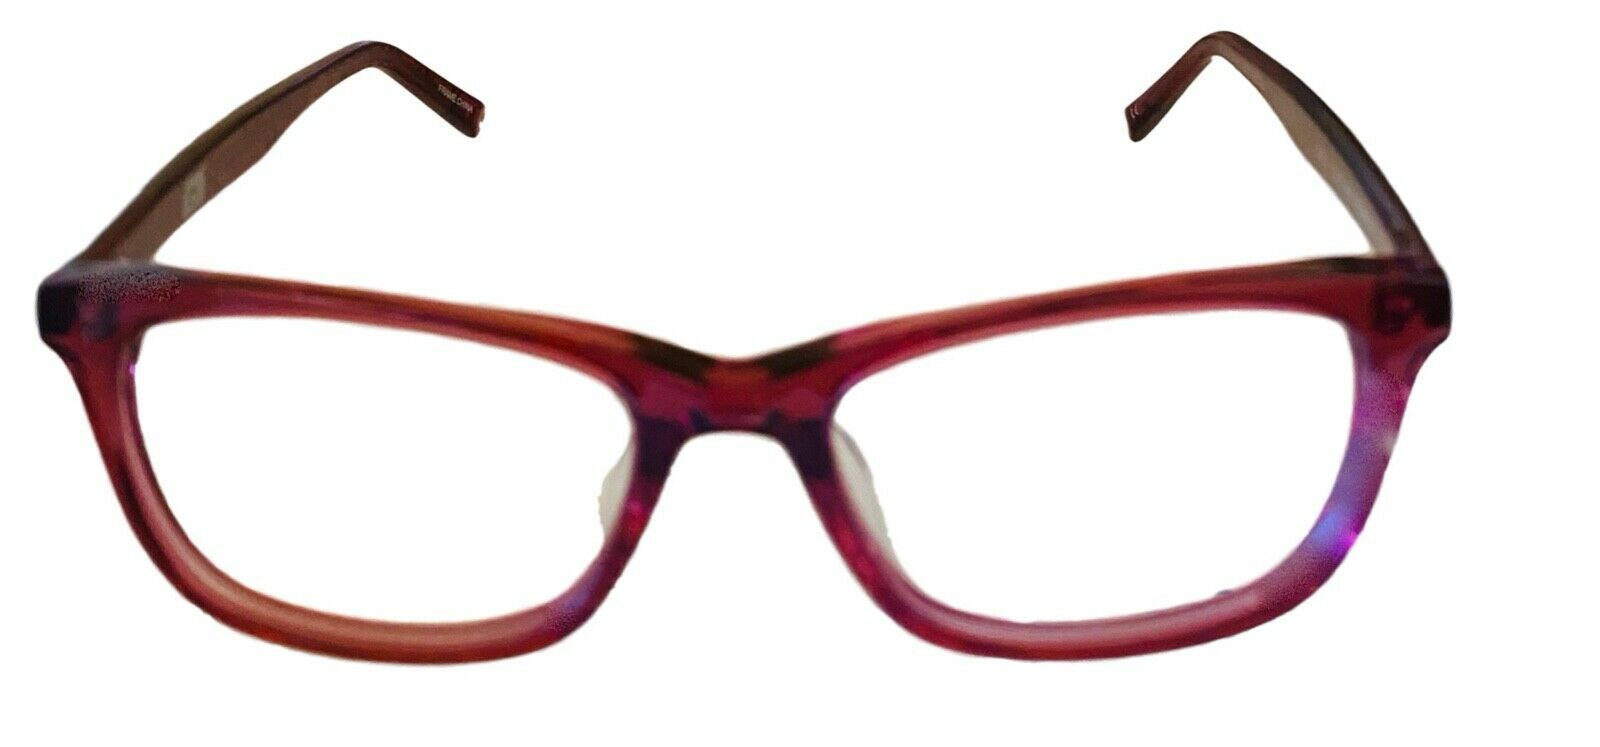 Primary image for Converse Opthalmic Mens Rectangle Purple Plastic Eyewear Frame Q400. 52mm